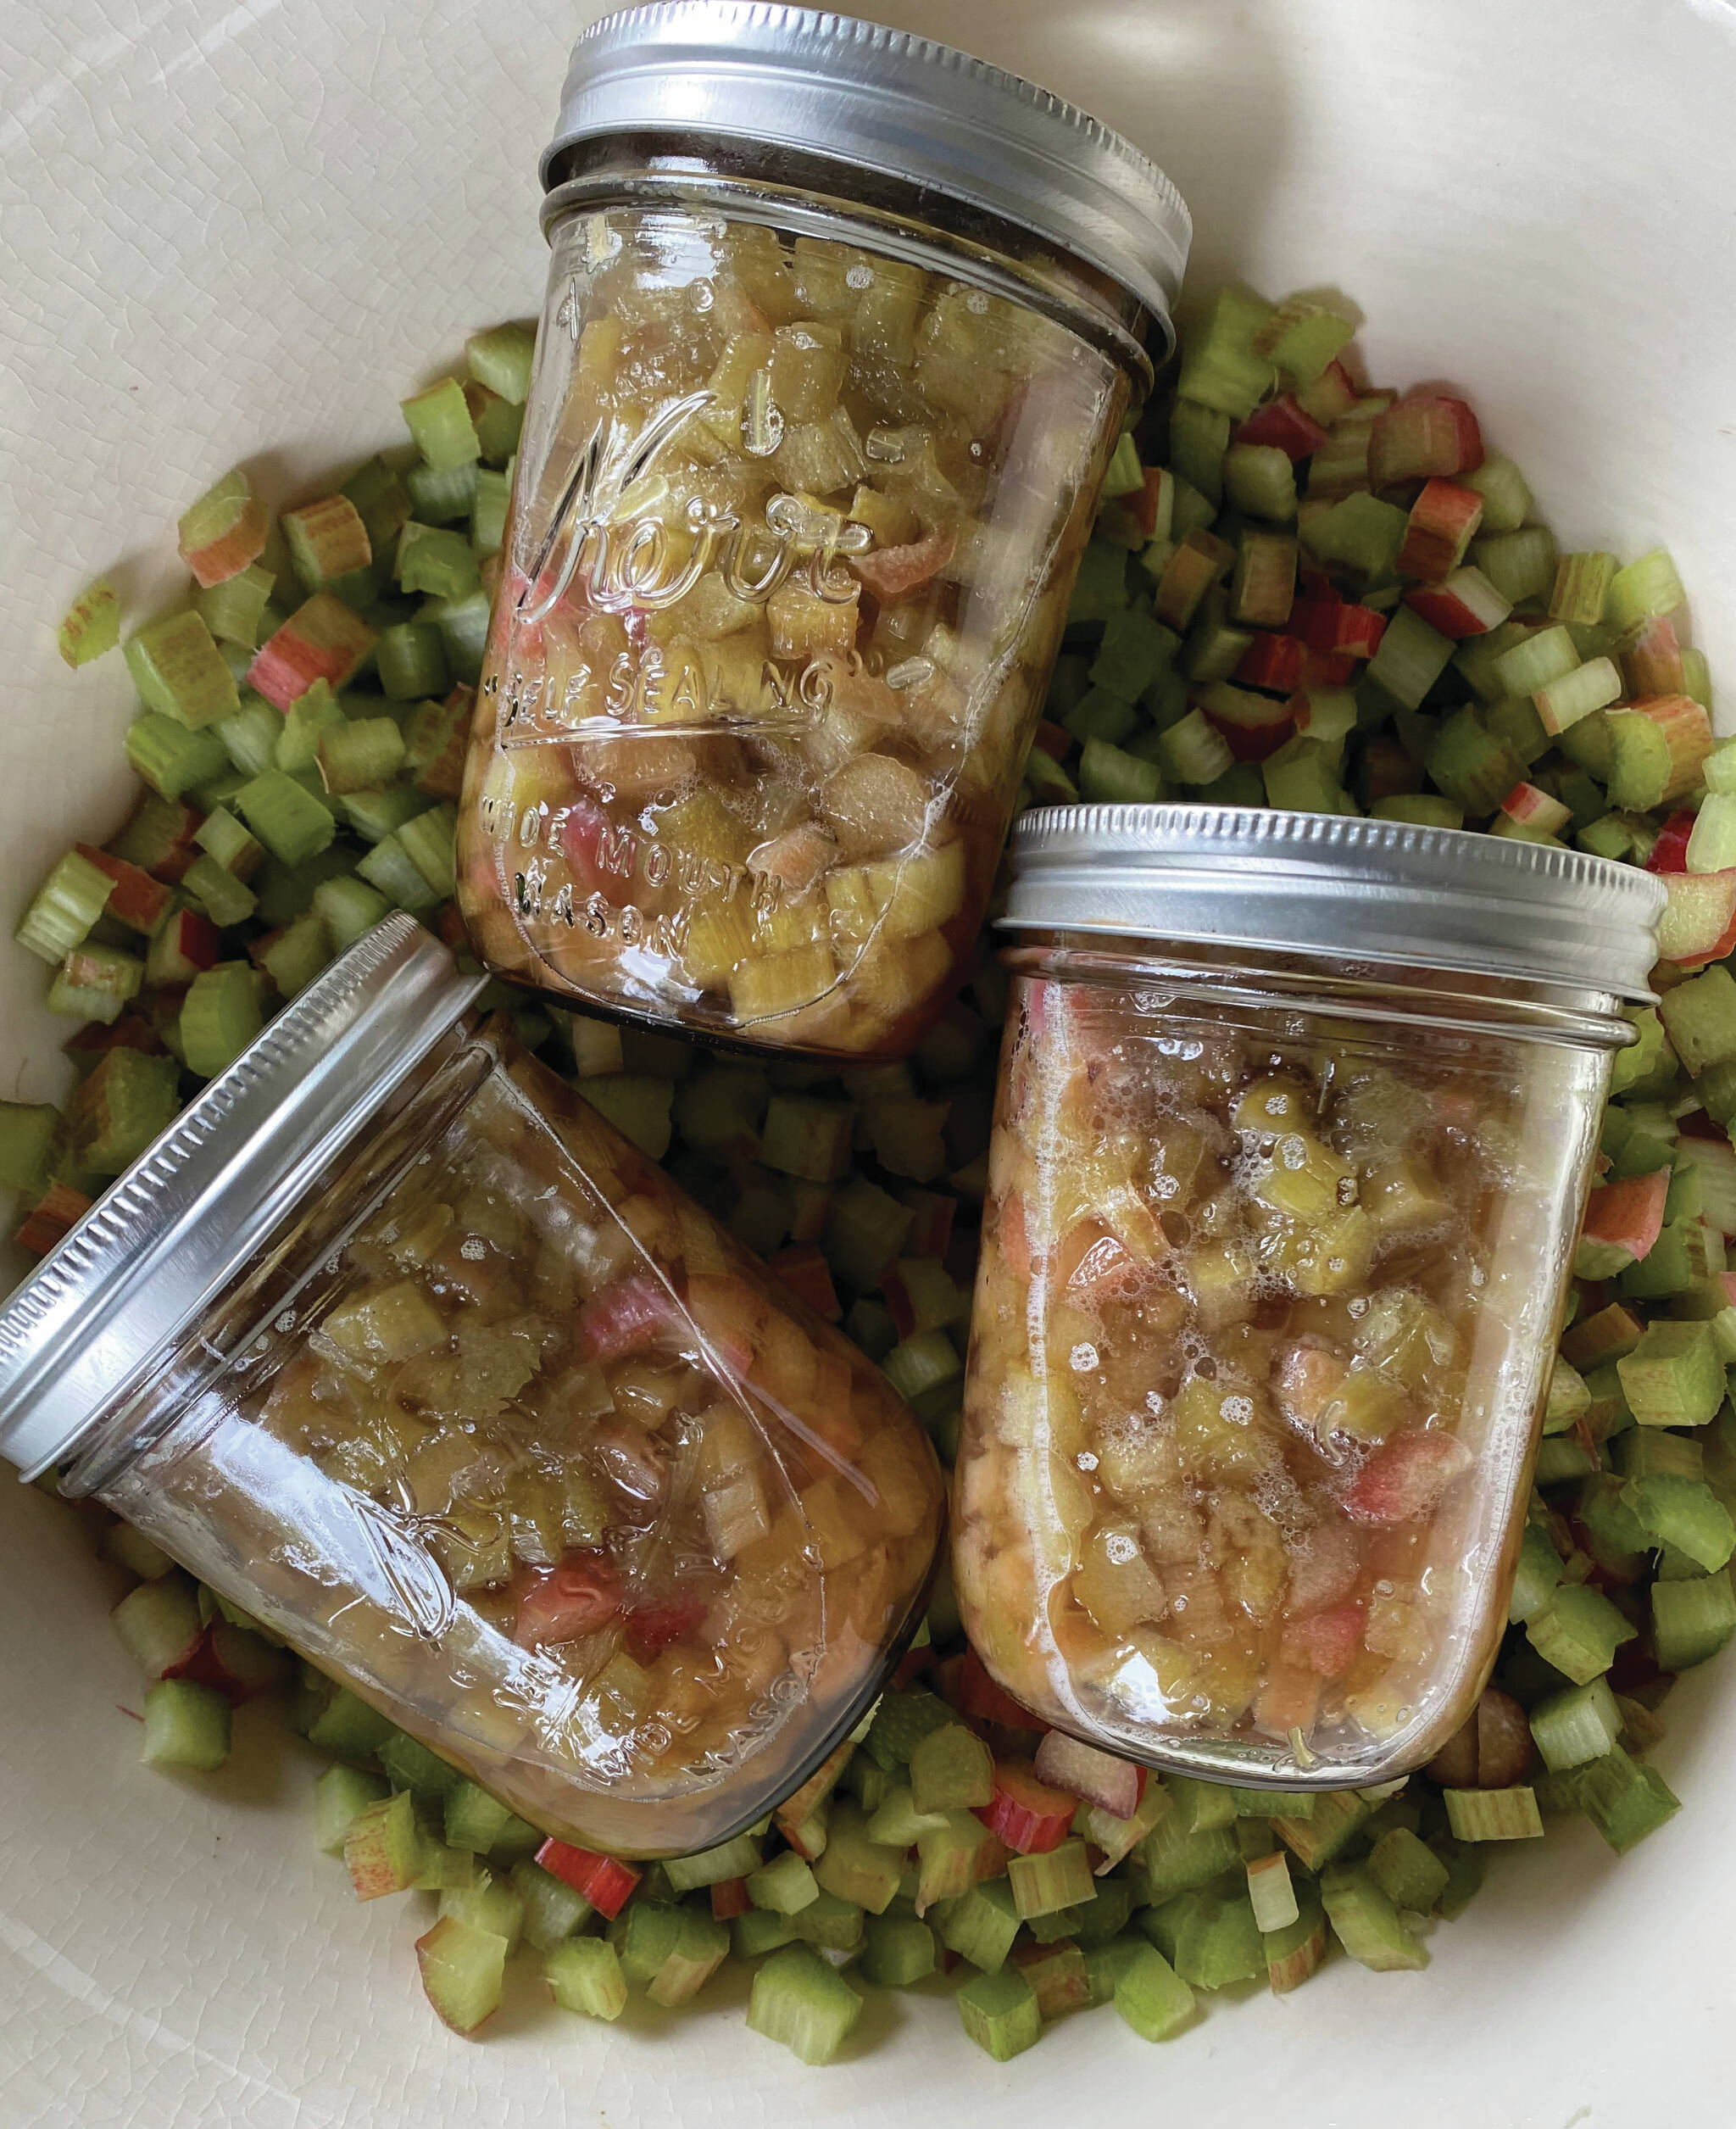 Photo by Tressa Dale/Peninsula Clarion
Rhubarb is preserved in jars.